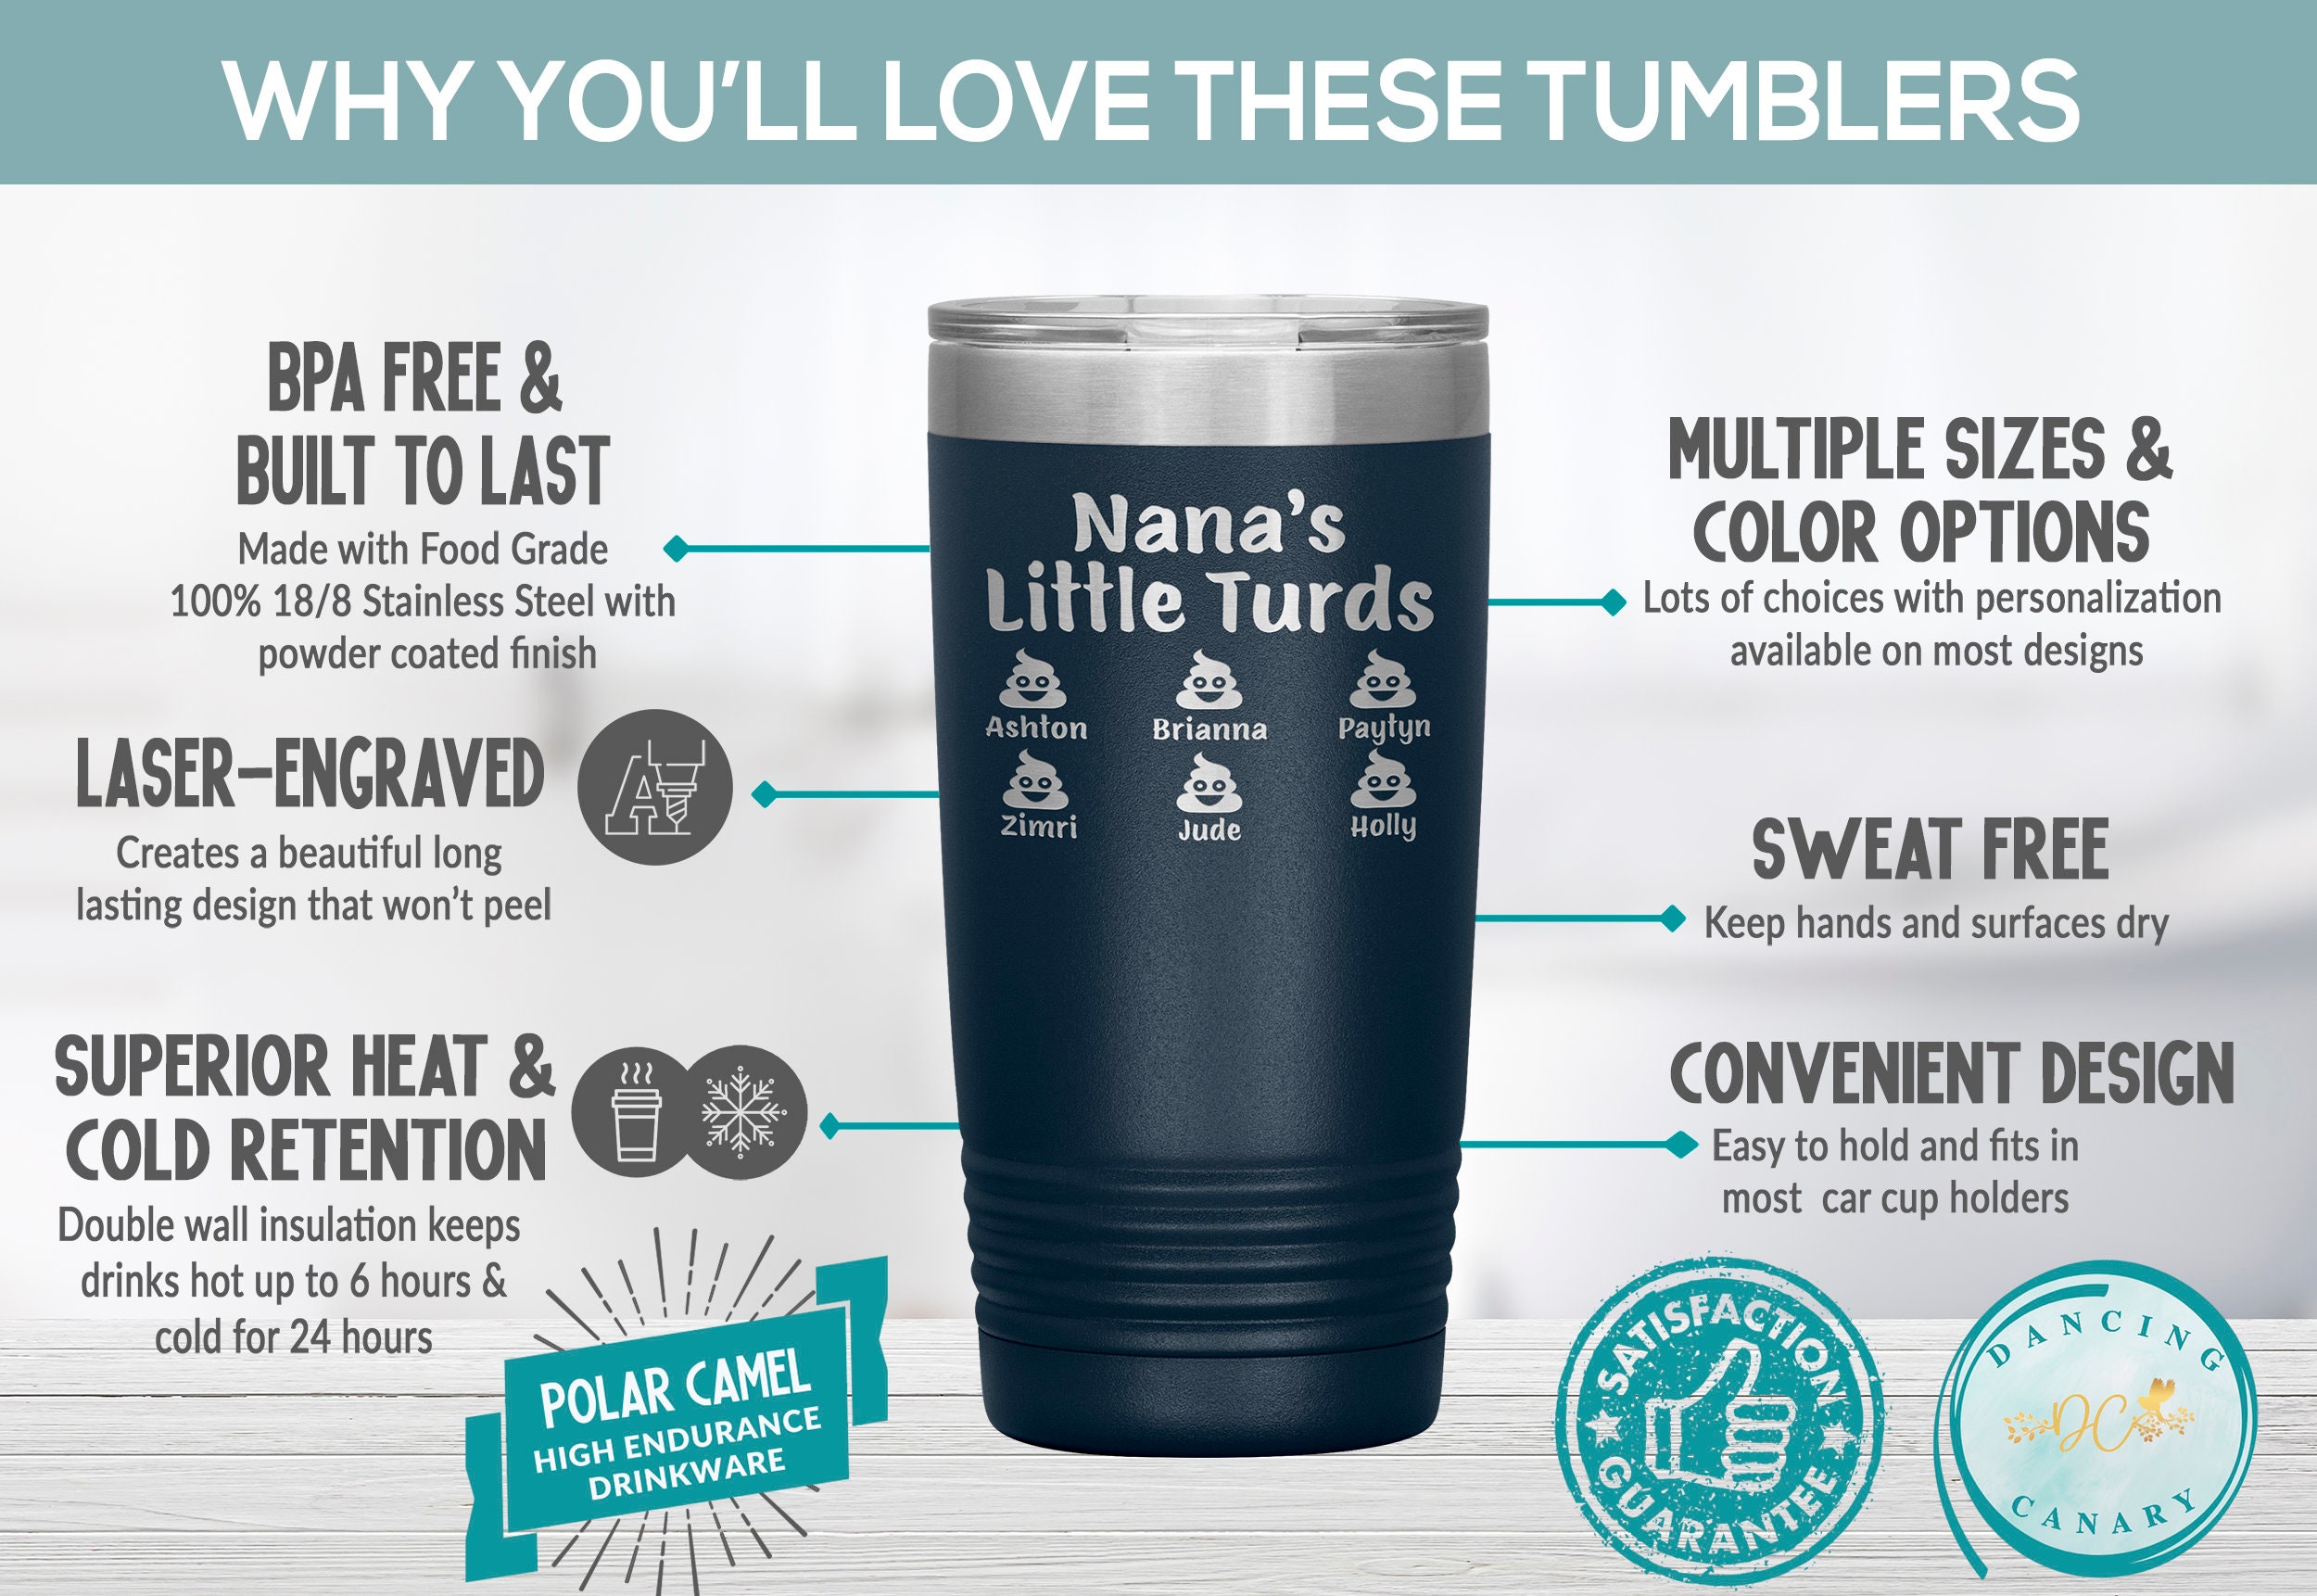 Retirement Gifts for Men Funny Tumbler Retiring Gift Ideas for Coworkers,  Boss, Dad, Friends Stainless Steel Matte Black 20 Oz Tumbler with Lid,  Water